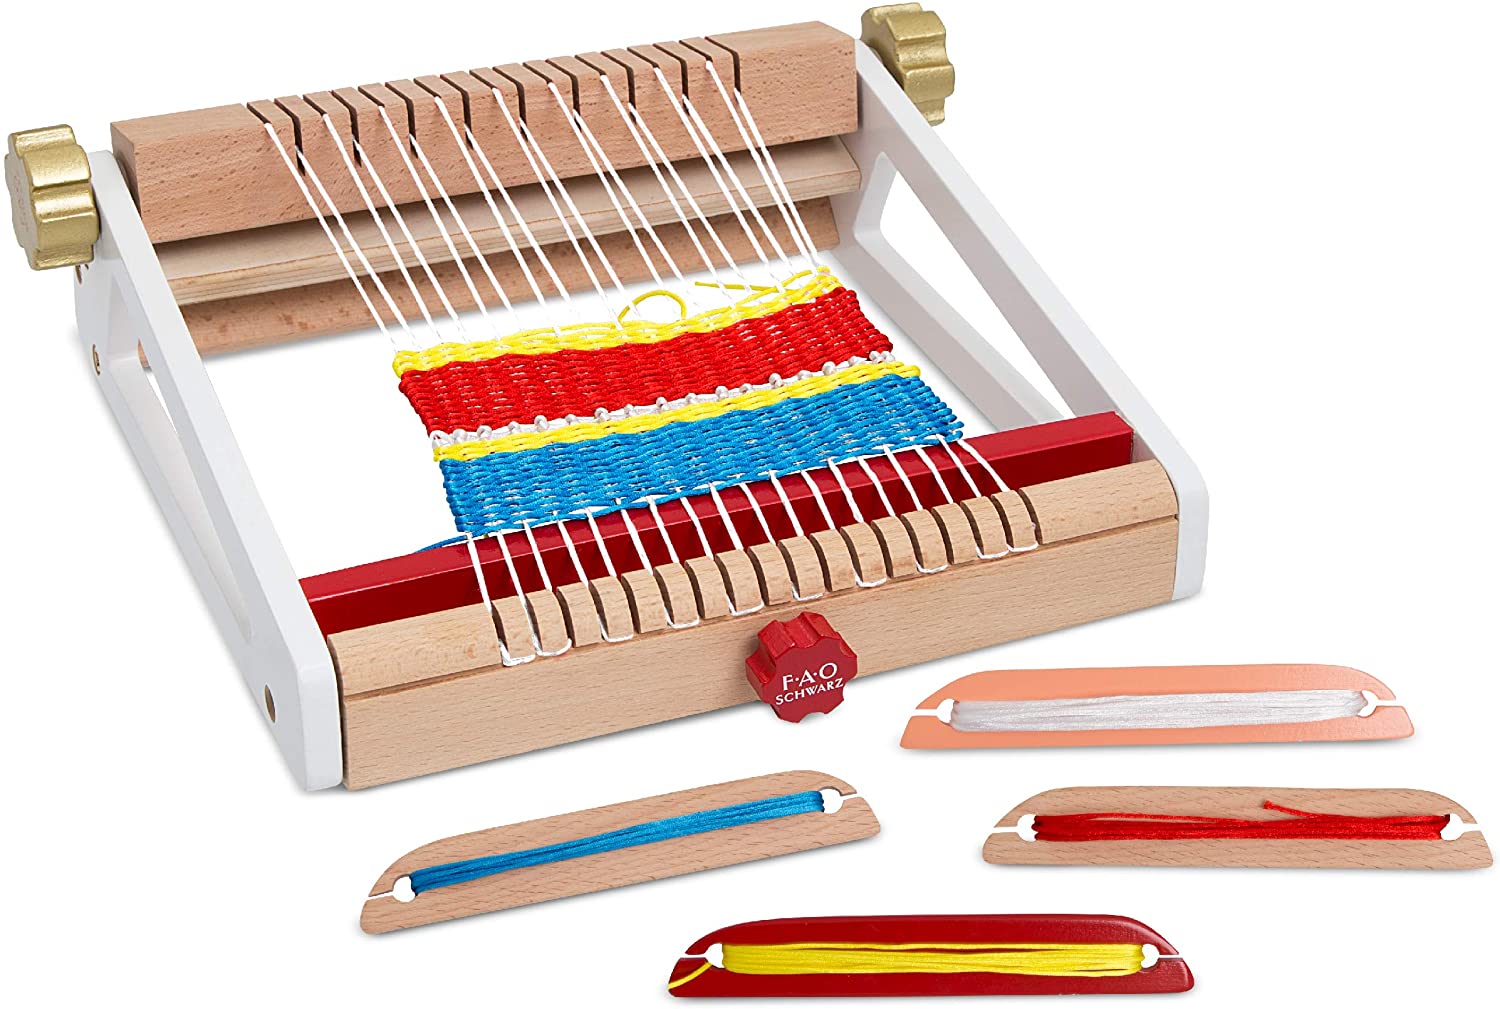 Fao Schwarz Aged 4+ Arts And Crafts Crafts Weaving Loom Set